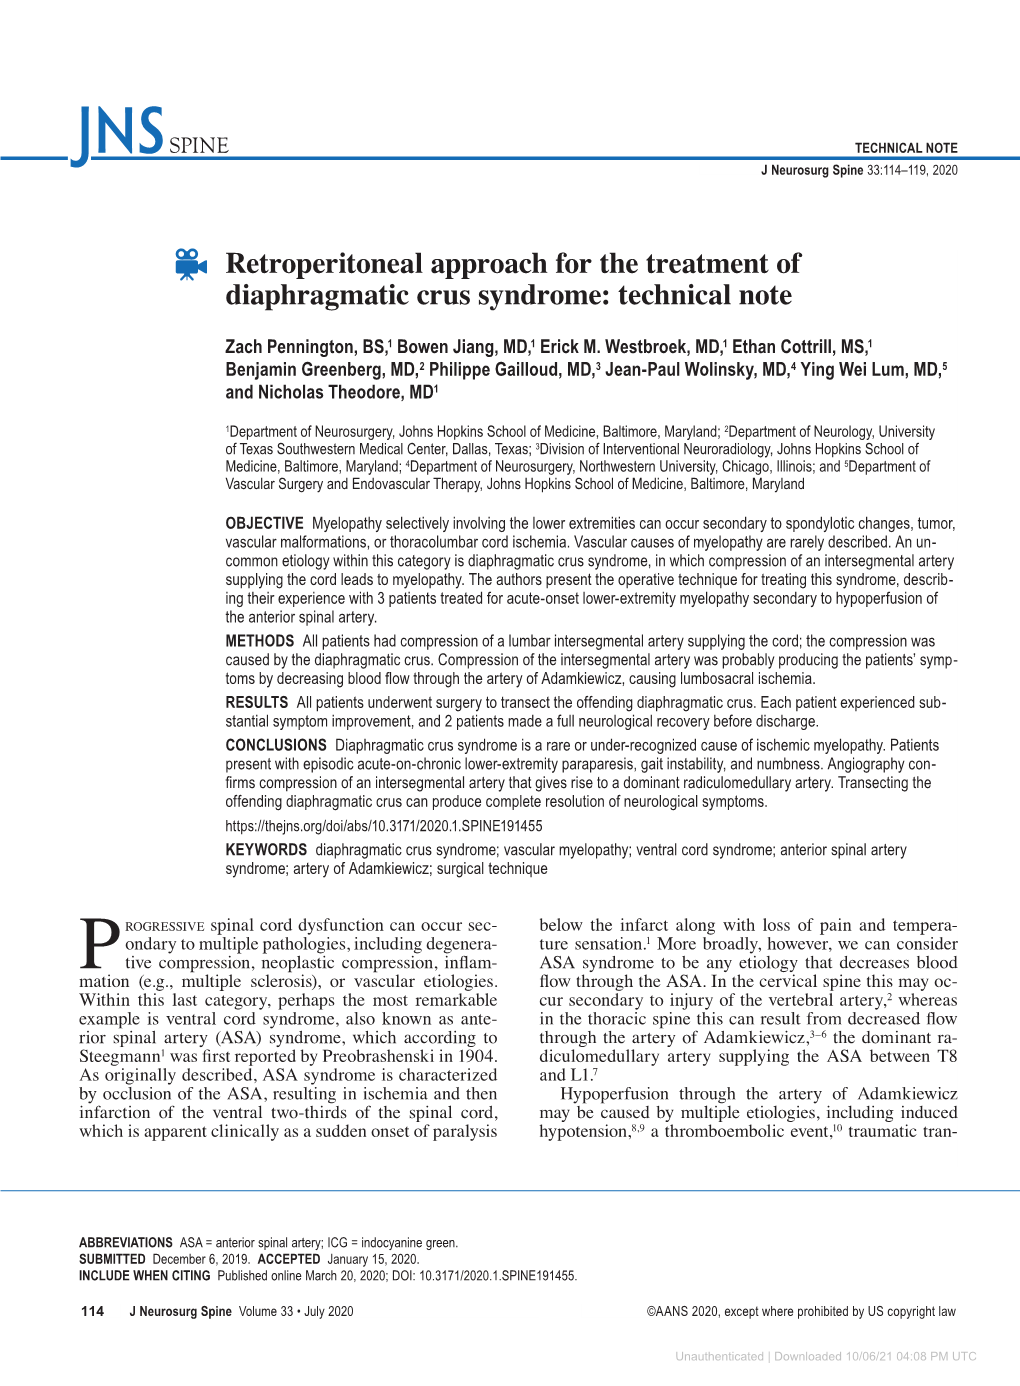 Retroperitoneal Approach for the Treatment of Diaphragmatic Crus Syndrome: Technical Note